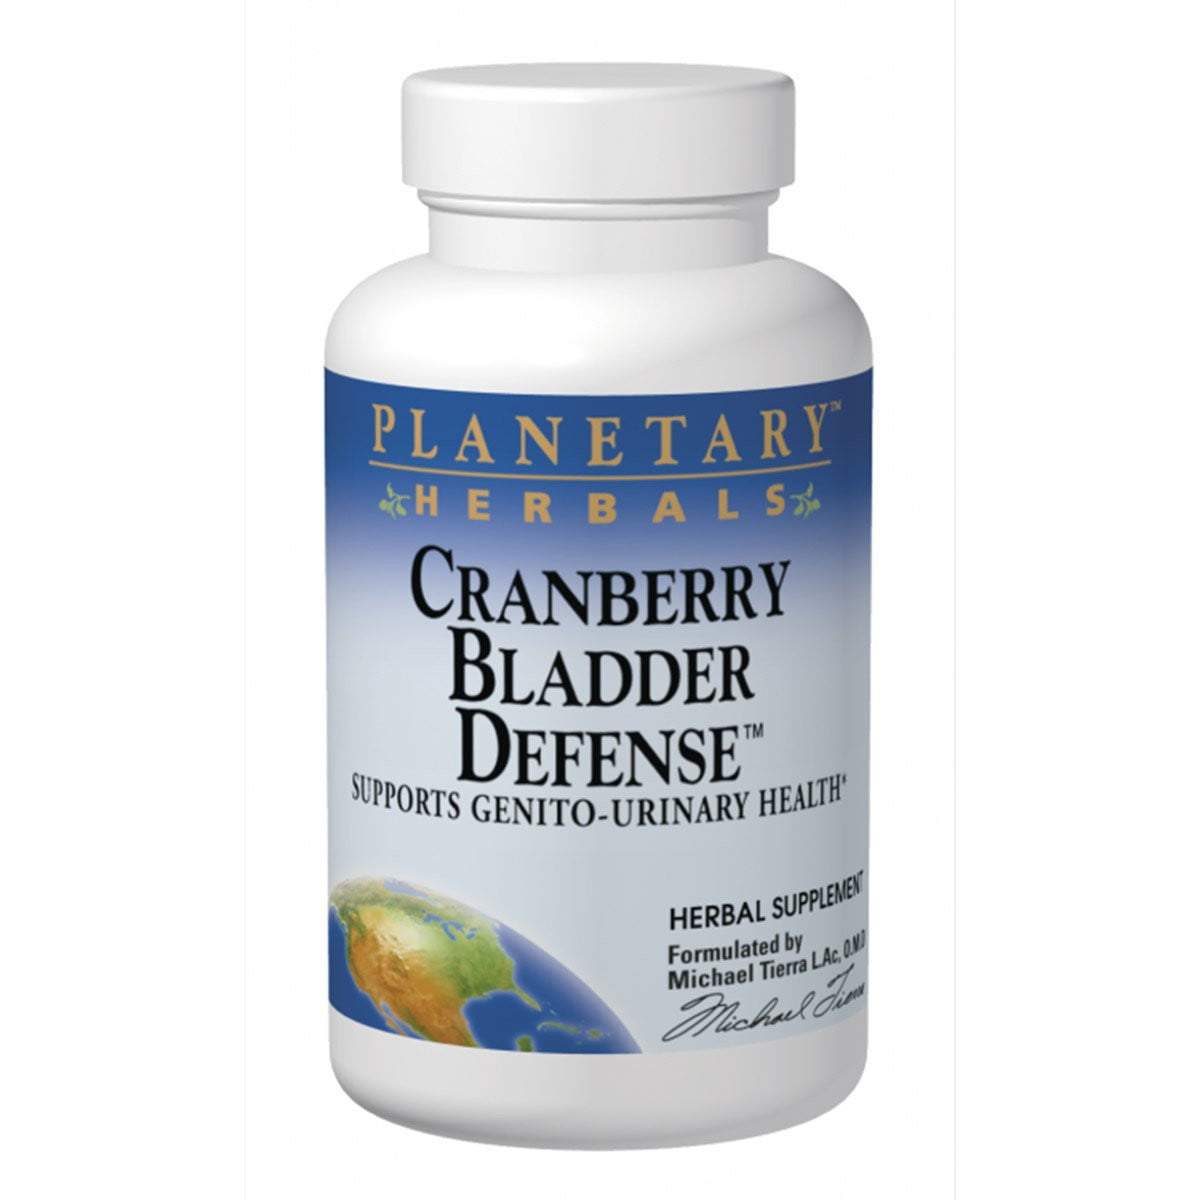 Planetary Herbals Cranberry Bladder Defense - 60 Tablets - 865mg